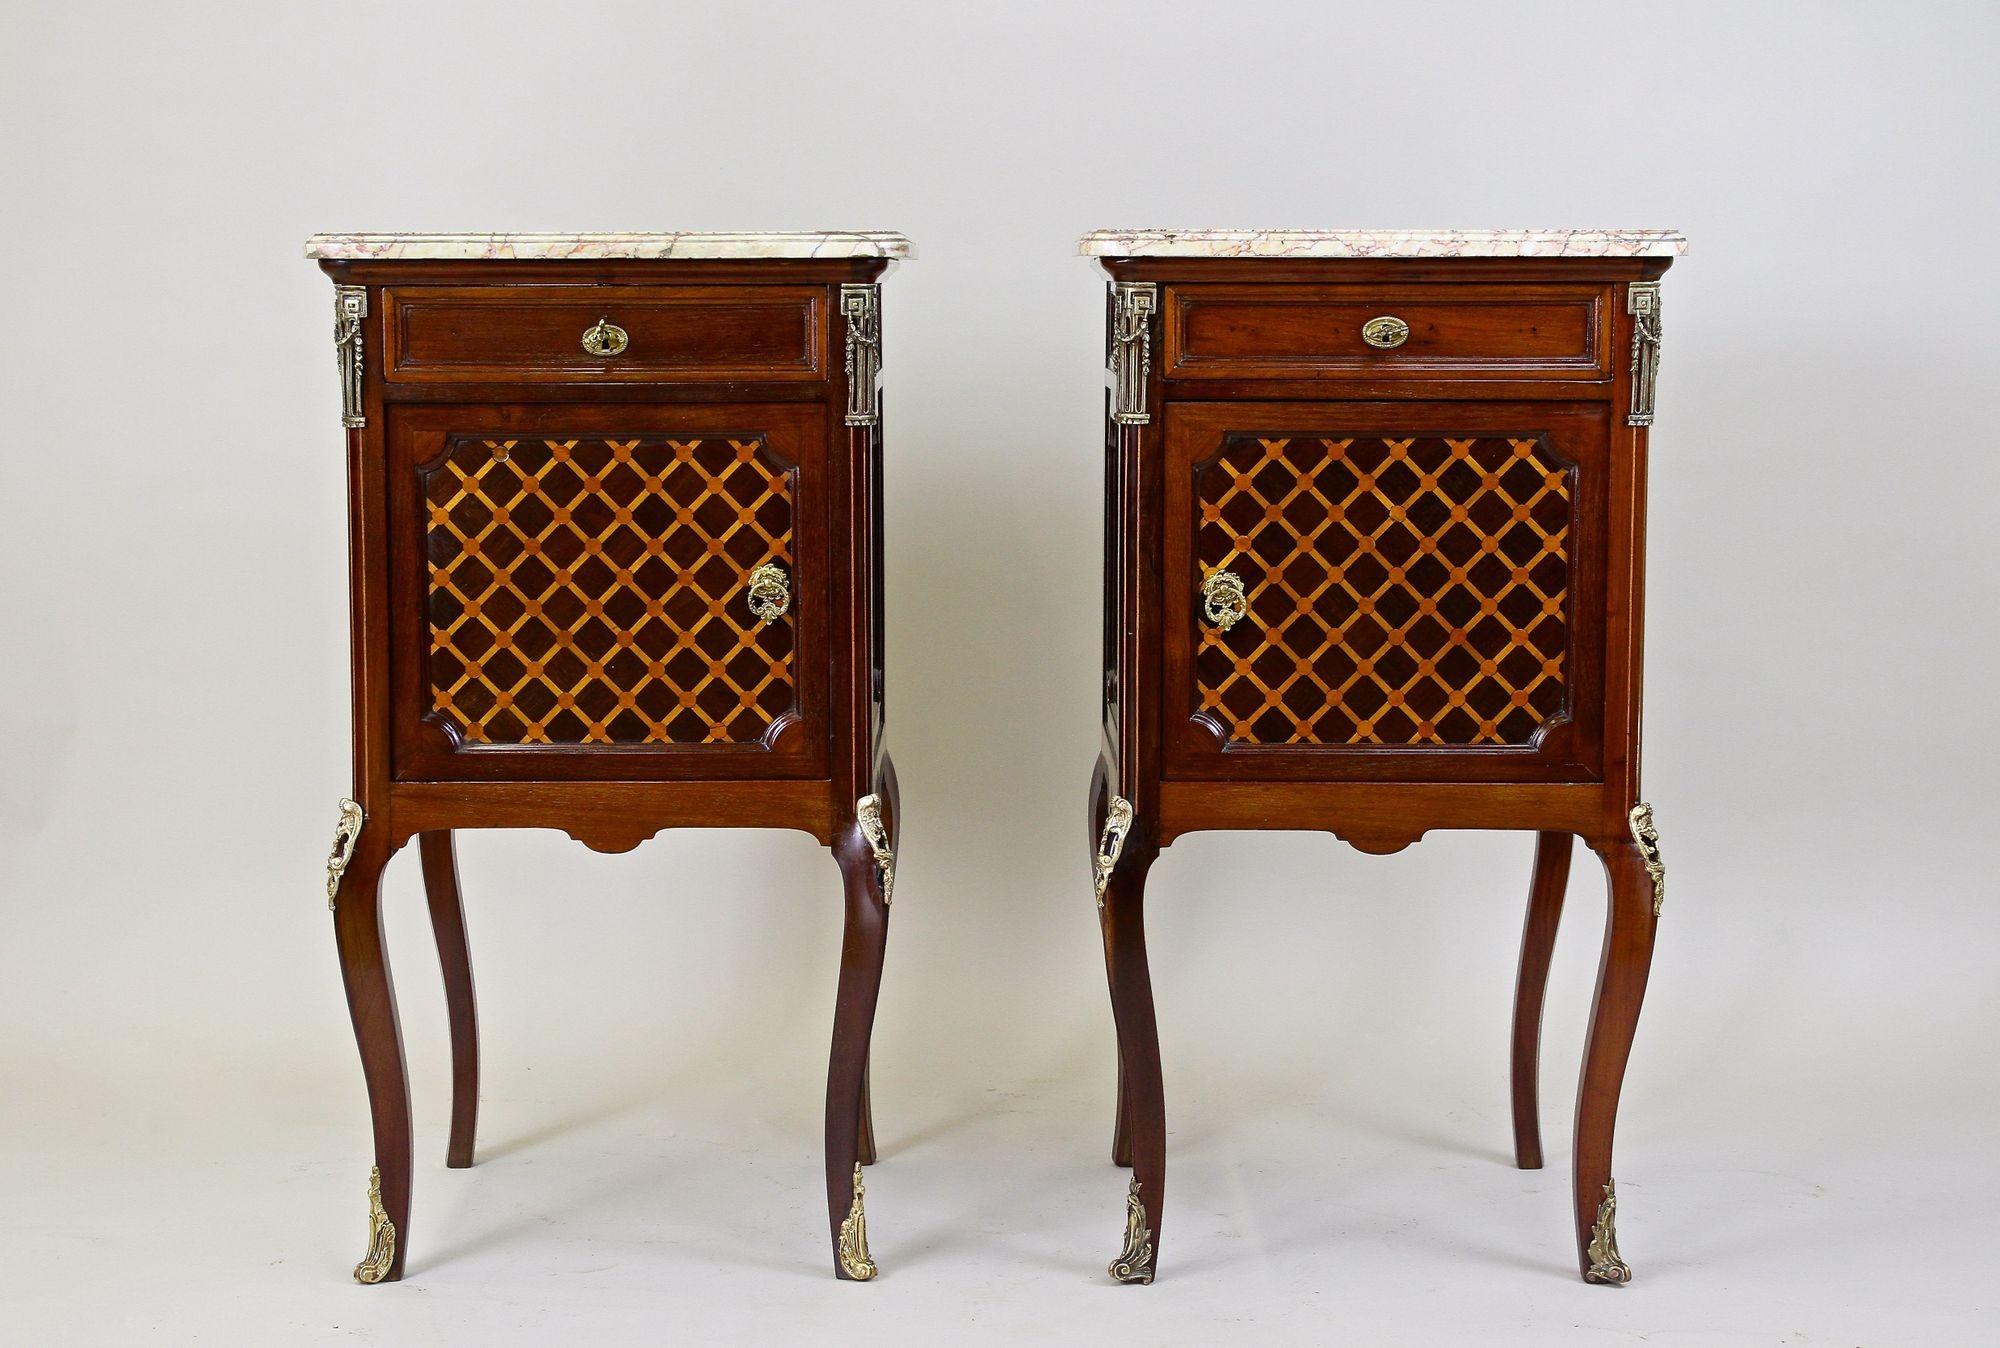 Absolutely beautiful pair of French marquetry pillar commodes/ side tables from the period in France around 1870. An amazing crafted pair of small 19th century transitional mahogany commodes, perfectly restored, impressing with its one of a kind